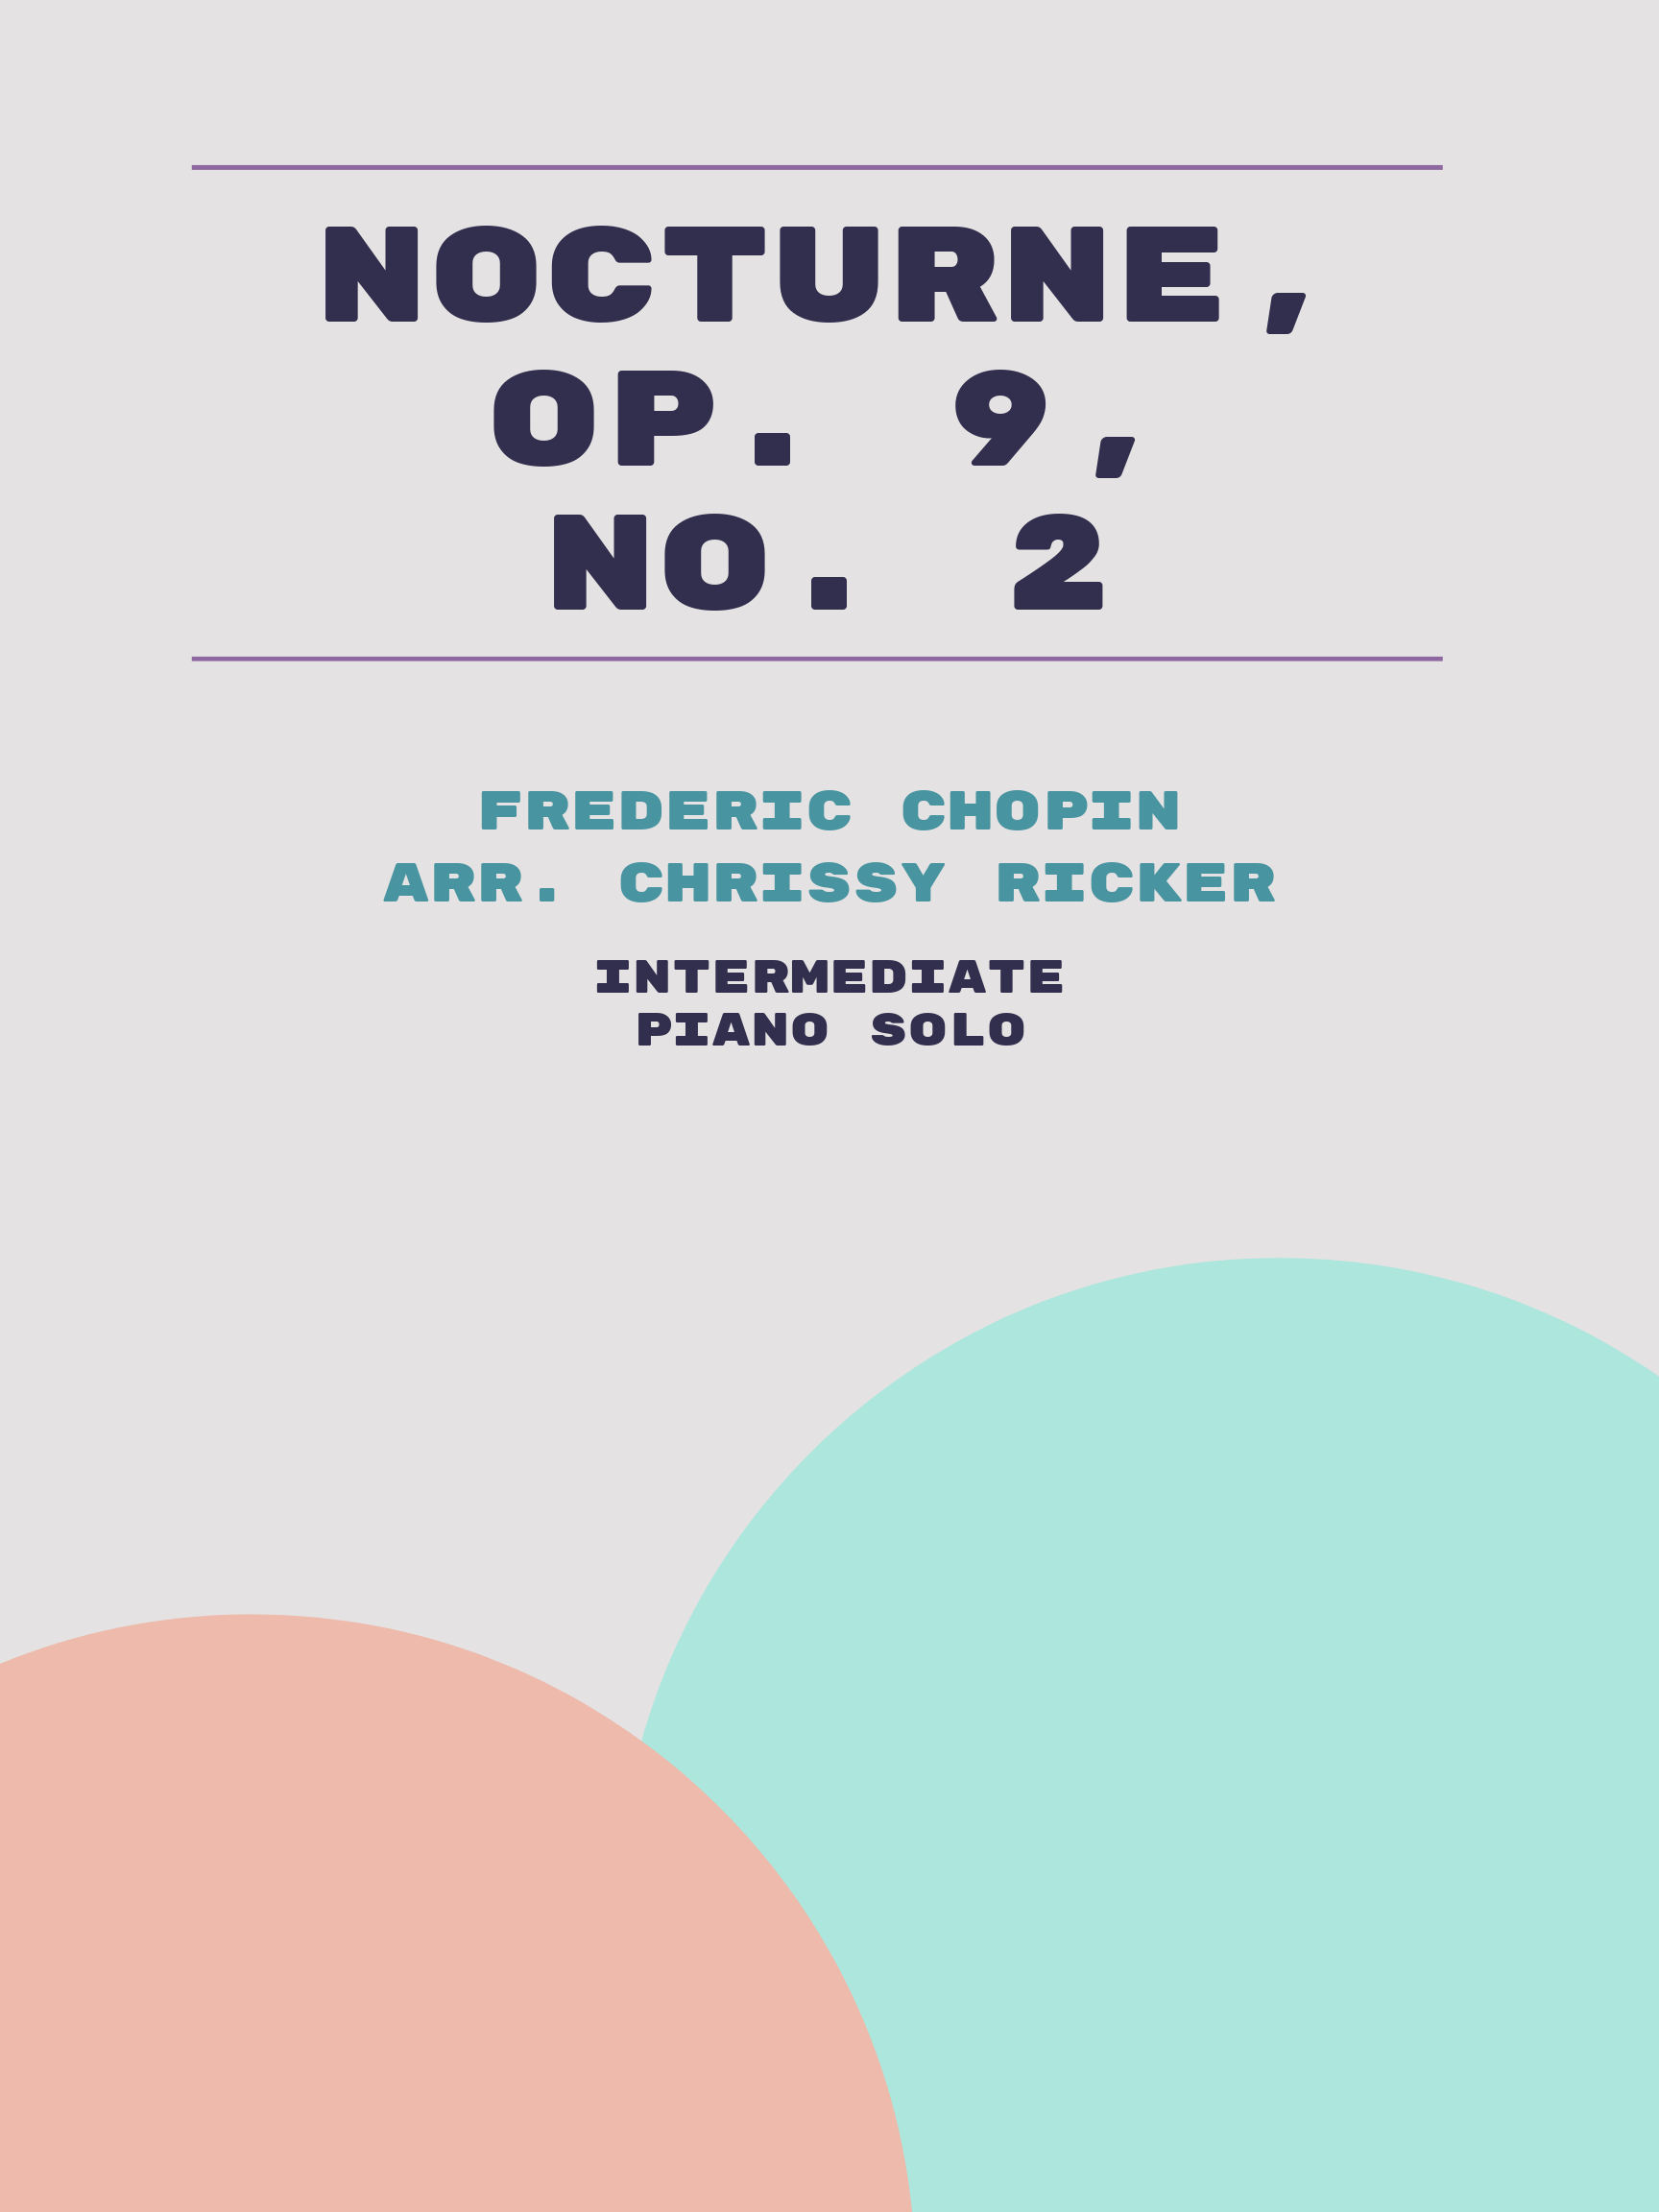 Nocturne, Op. 9, No. 2 by Frederic Chopin